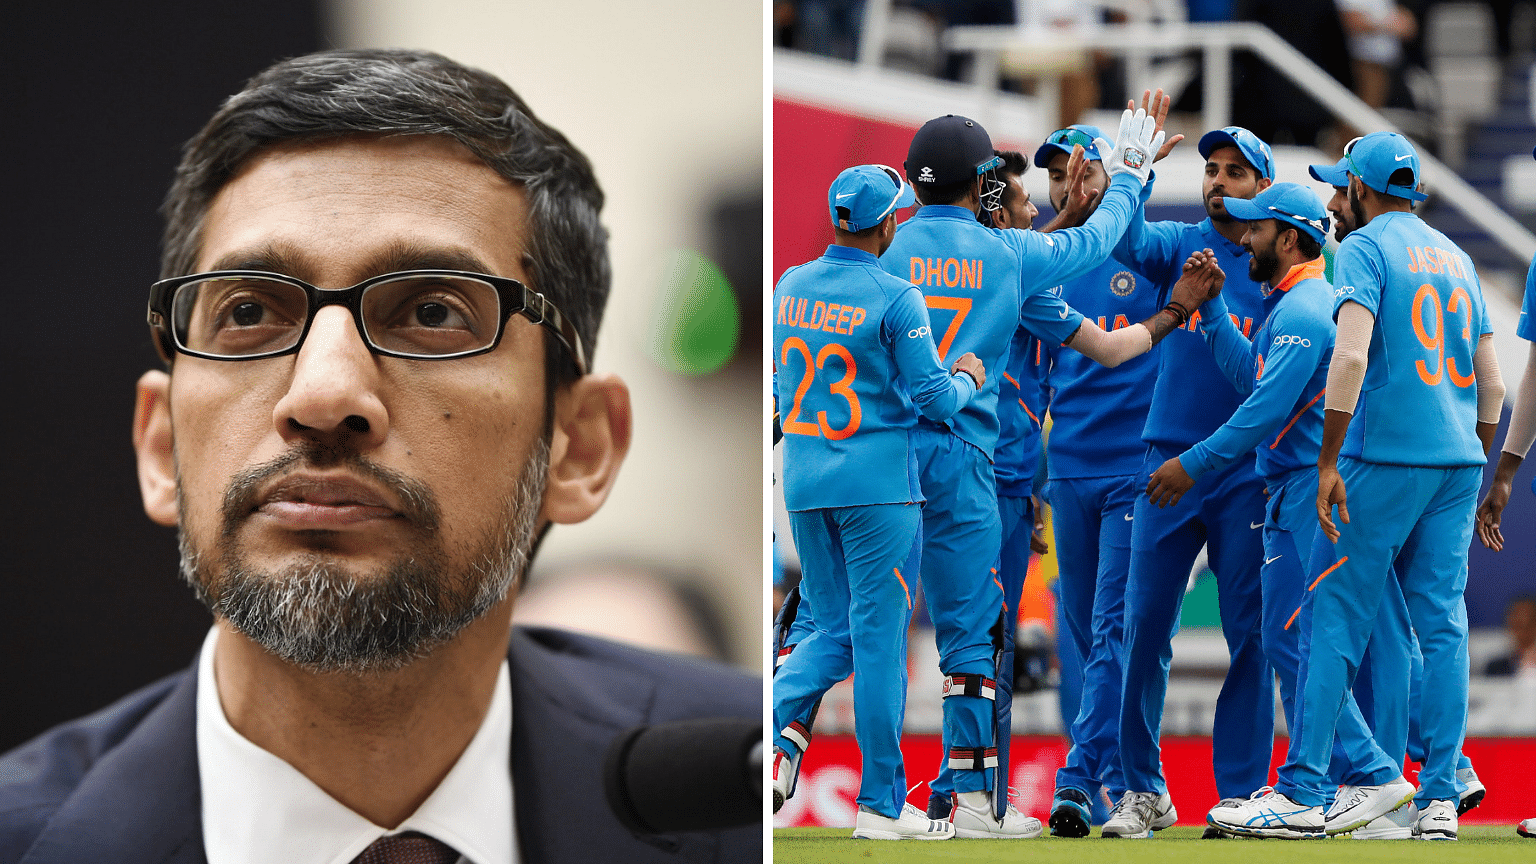 ICC World Cup final match should be between England and India, said Sundar Pichai.